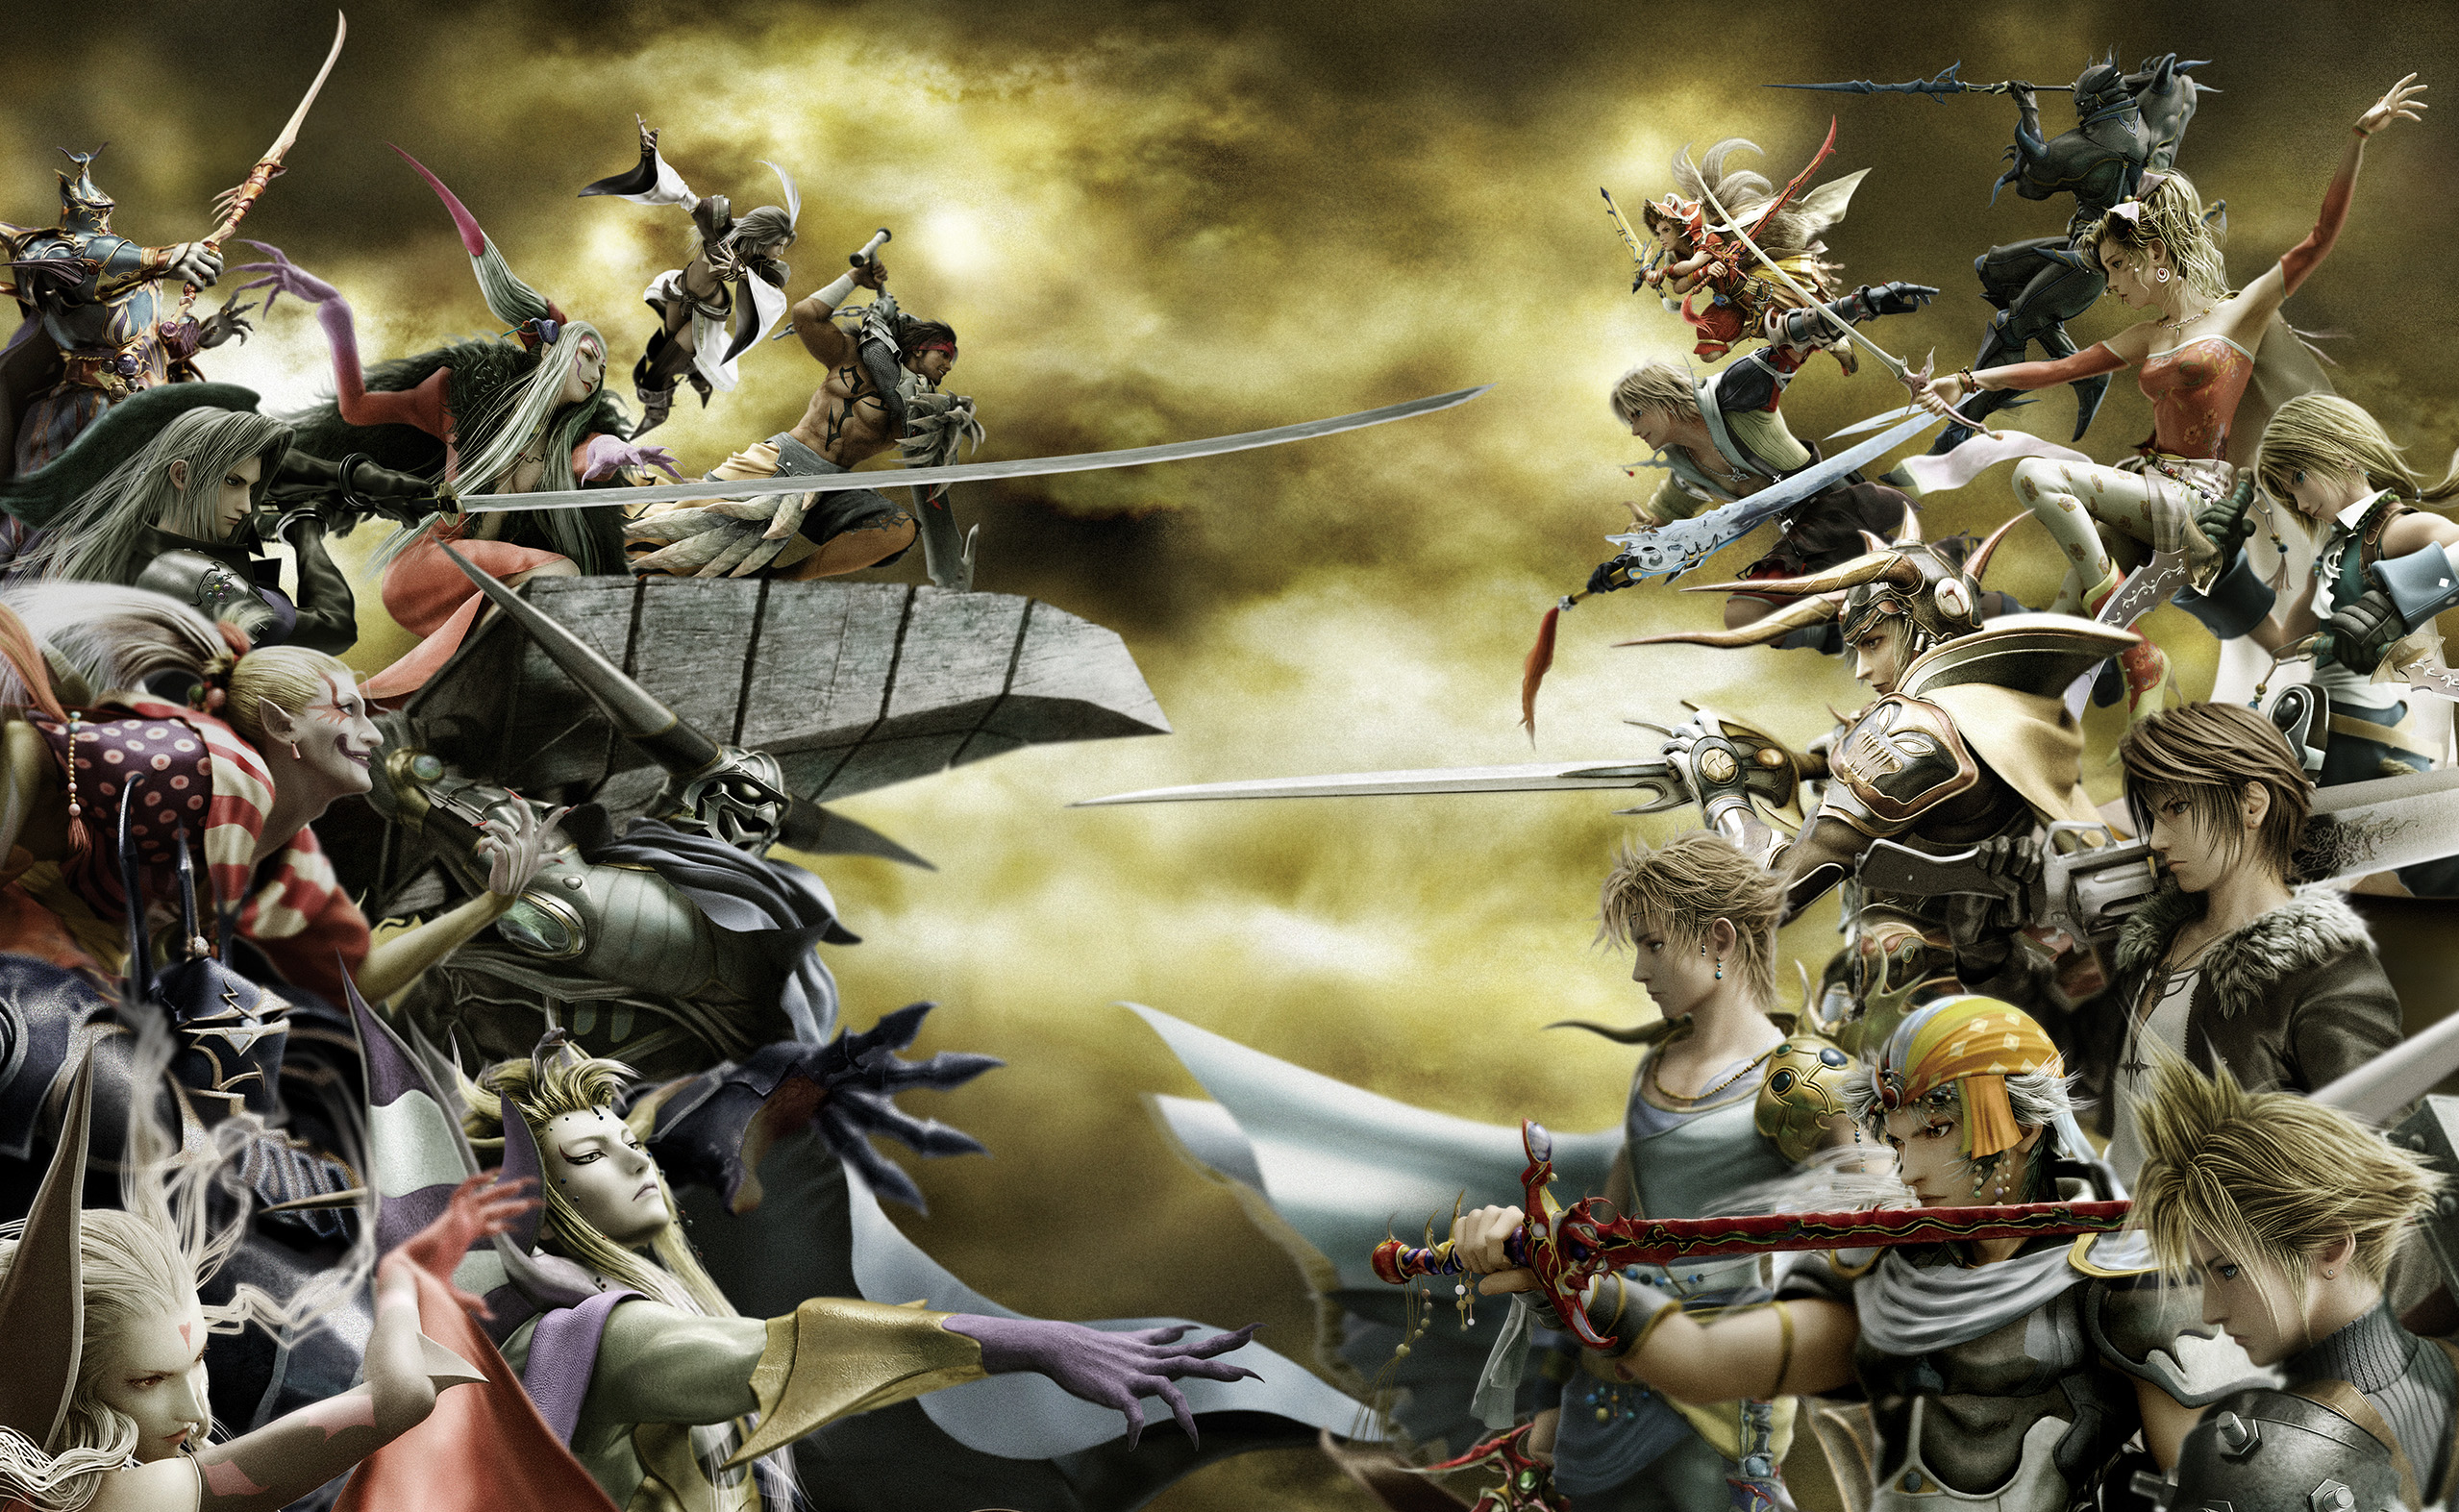 A group of popular Final Fantasy characters featured in Dissidia game.